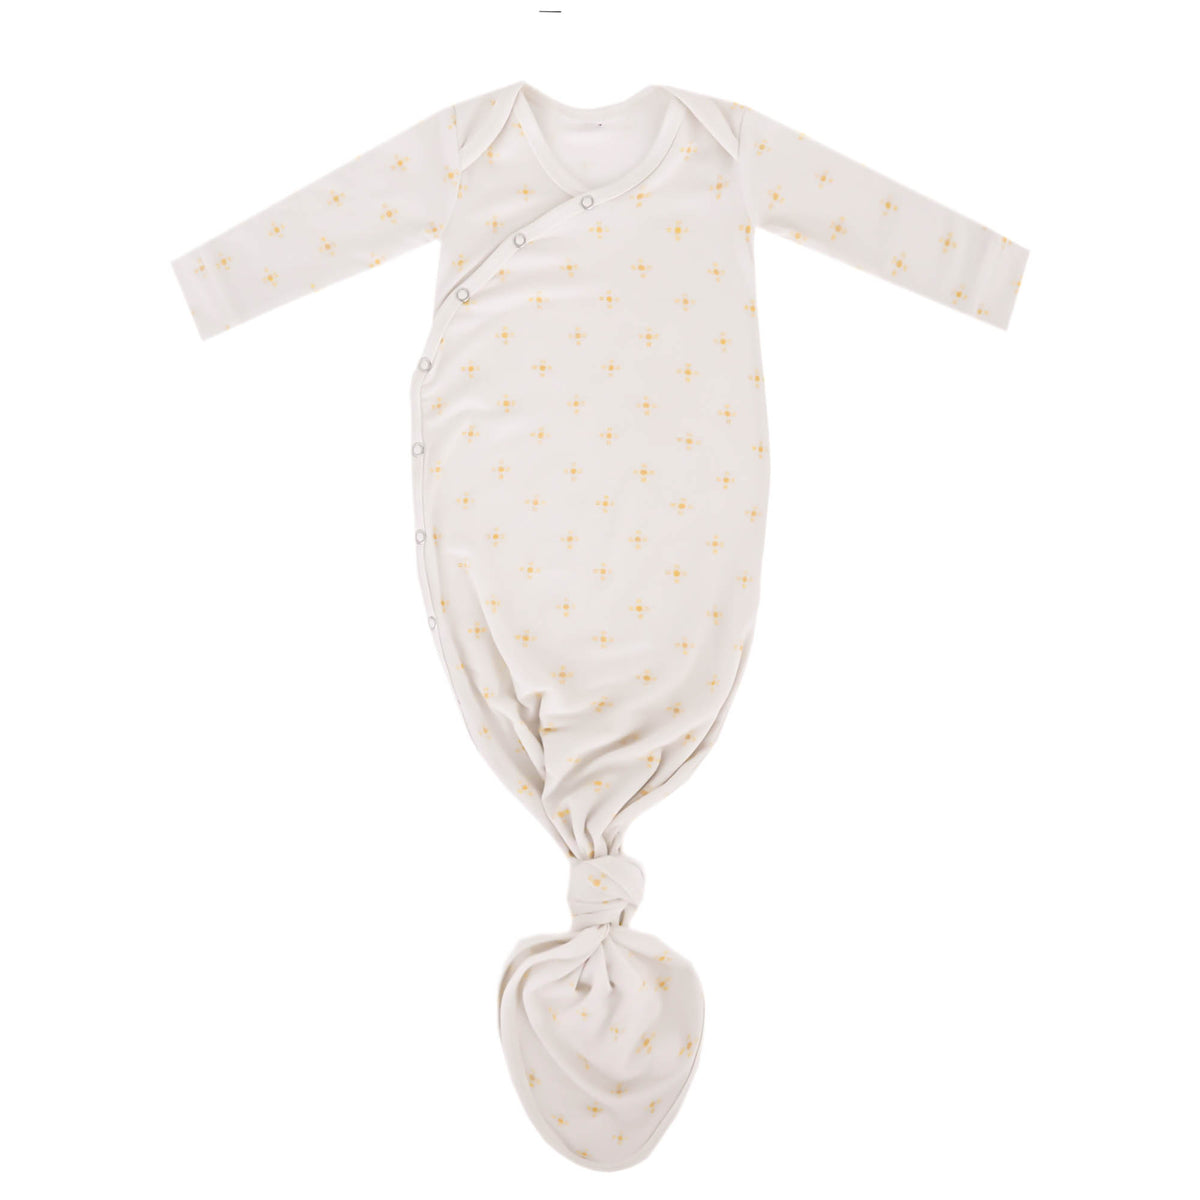 Newborn Knotted Gown - Santa Fe